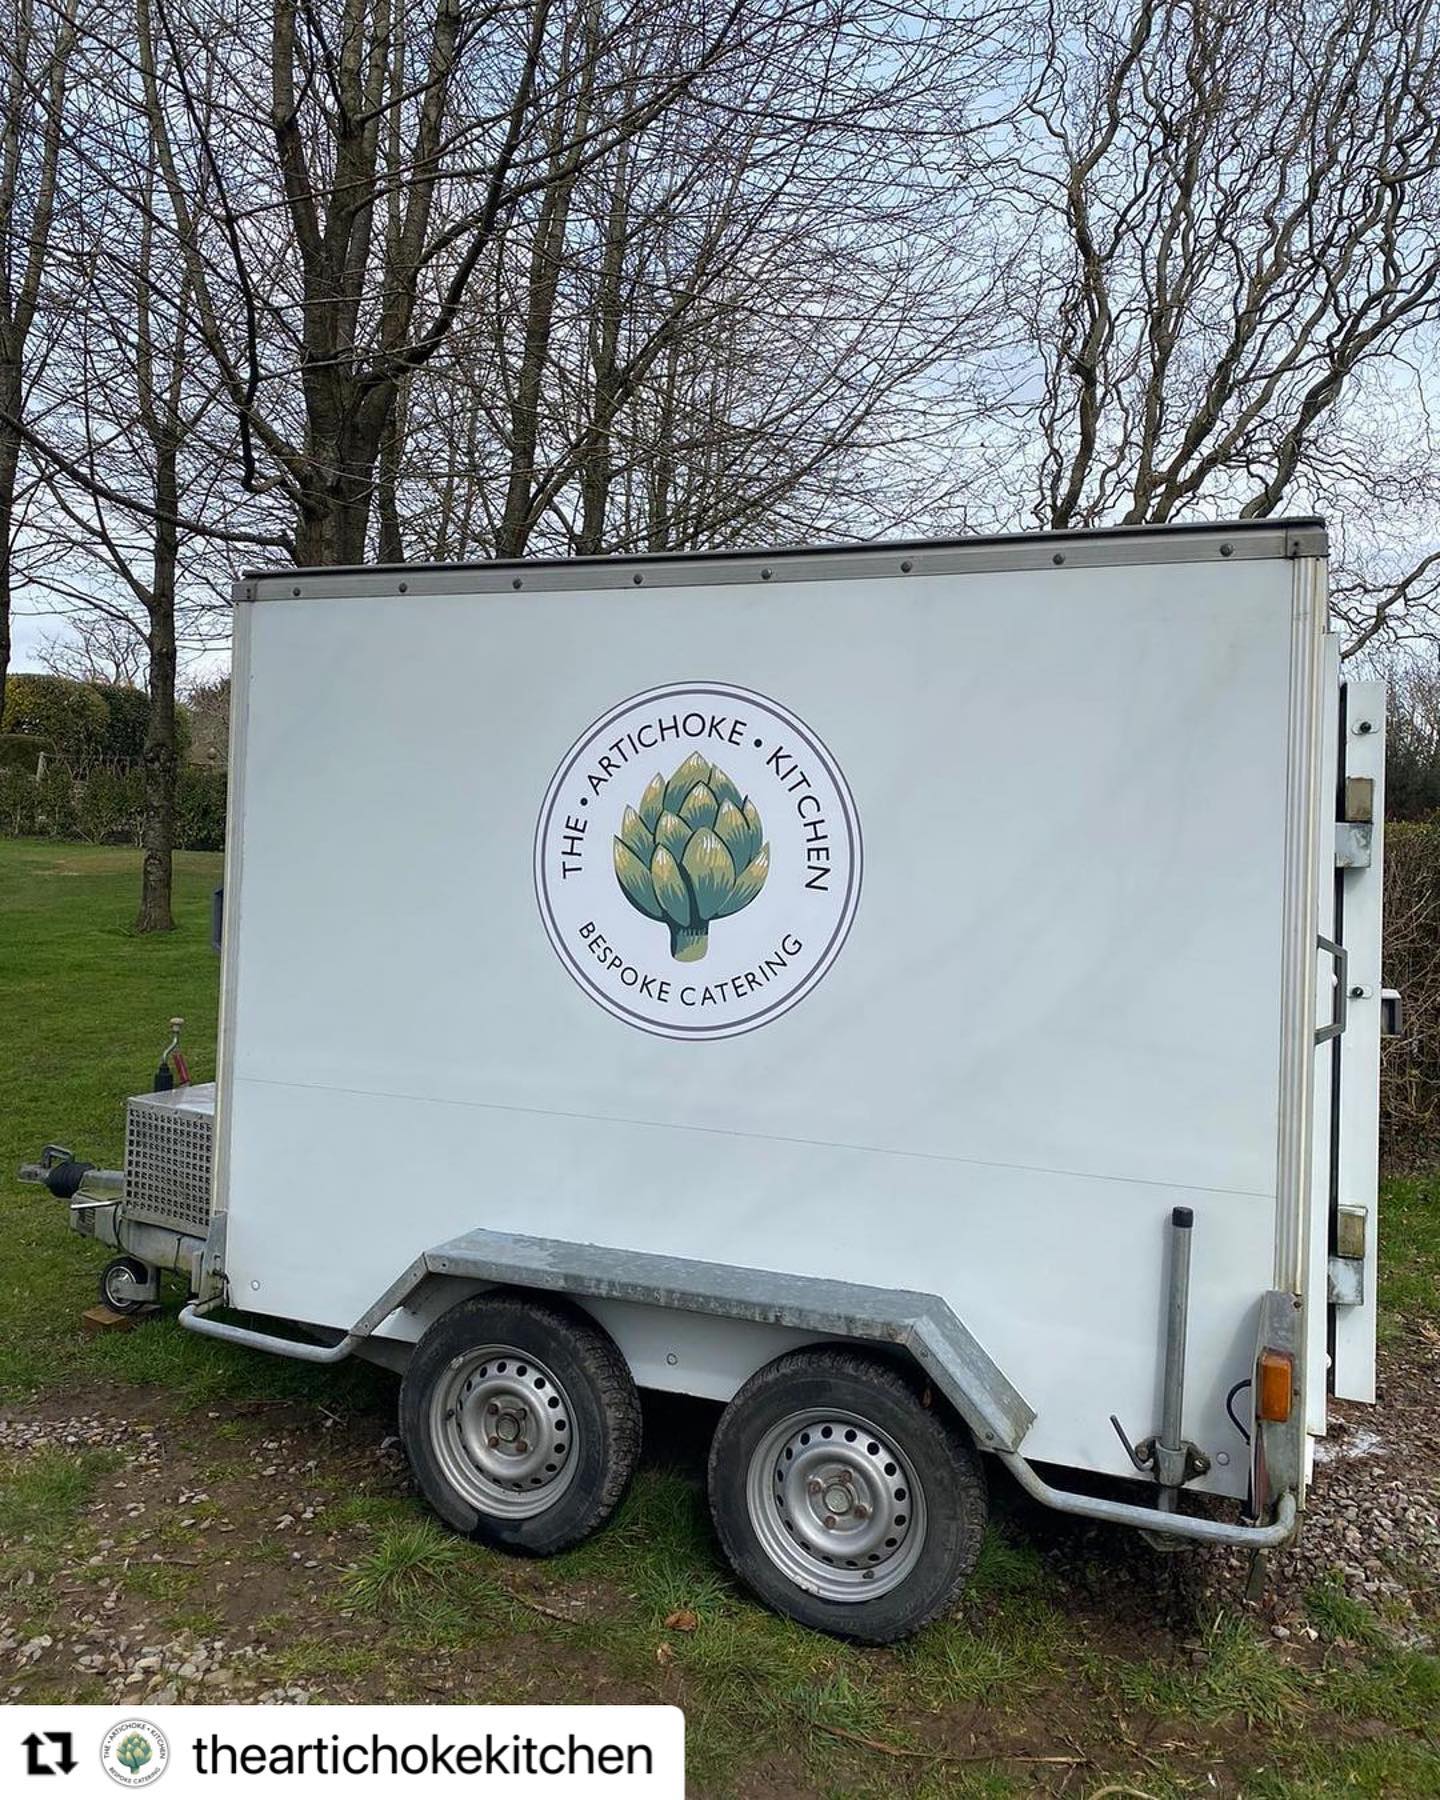 The @theartichokekitchen ‘s chiller trailer has been in with us for a service so that it is fit and ready for its busy season ahead. 

Keeping your trailer in good working order will ensure your safety, the safety of others and the safety of your cargo. Both the police and VOSA are actively stopping trailers to check their roadworthiness and are issuing points as well as fines, so don’t get caught out and run the risk of points on your licence- book your service to avoid this happening.
The National Trailer and Towing Association (NTTA) recommend you have your trailer serviced every 6000 miles or every 6 months, whichever is shorter.

All trailers are serviced by our own fully trained engineers in our on-site workshop and you also have the peace of mind knowing we are an accredited NTTA ‘Quality Secured’ Trailer centre adhering to their code of practice that promotes: Workshop best practice, customer service and professional workmanship.

For more details, or to book your trailer in for a service, please get in touch 01403 782862 / info@universal-trailers.co.uk